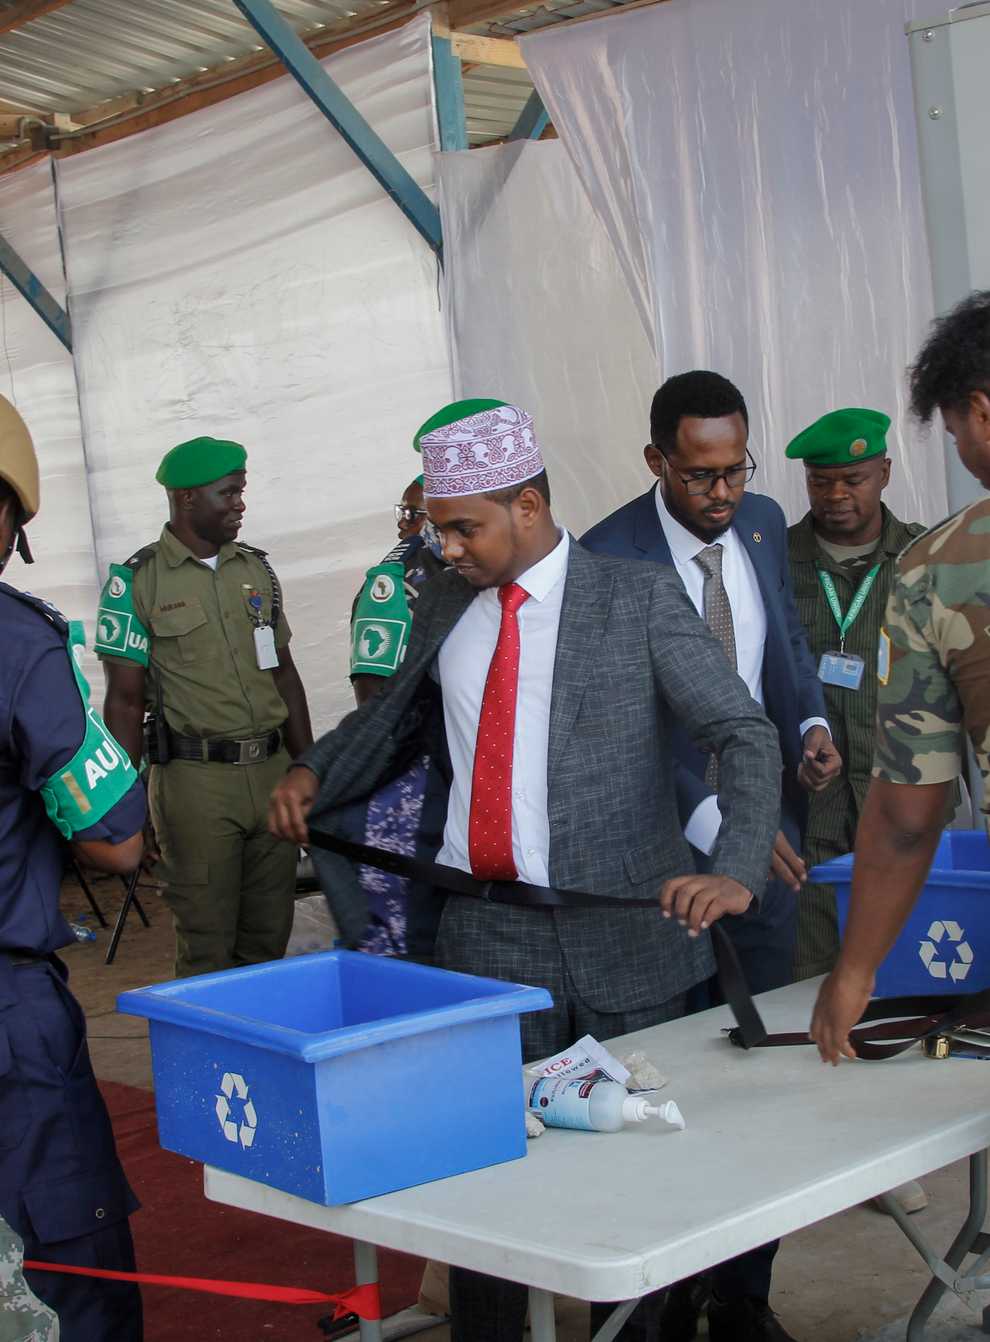 Somali lawmakers are checked by security forces as they arrive to cast their vote in the presidential election, at the Halane military camp which is protected by African Union peacekeepers, in Mogadishu, Somalia Sunday, May 15, 2022. (Farah Abdi Warsameh/AP)